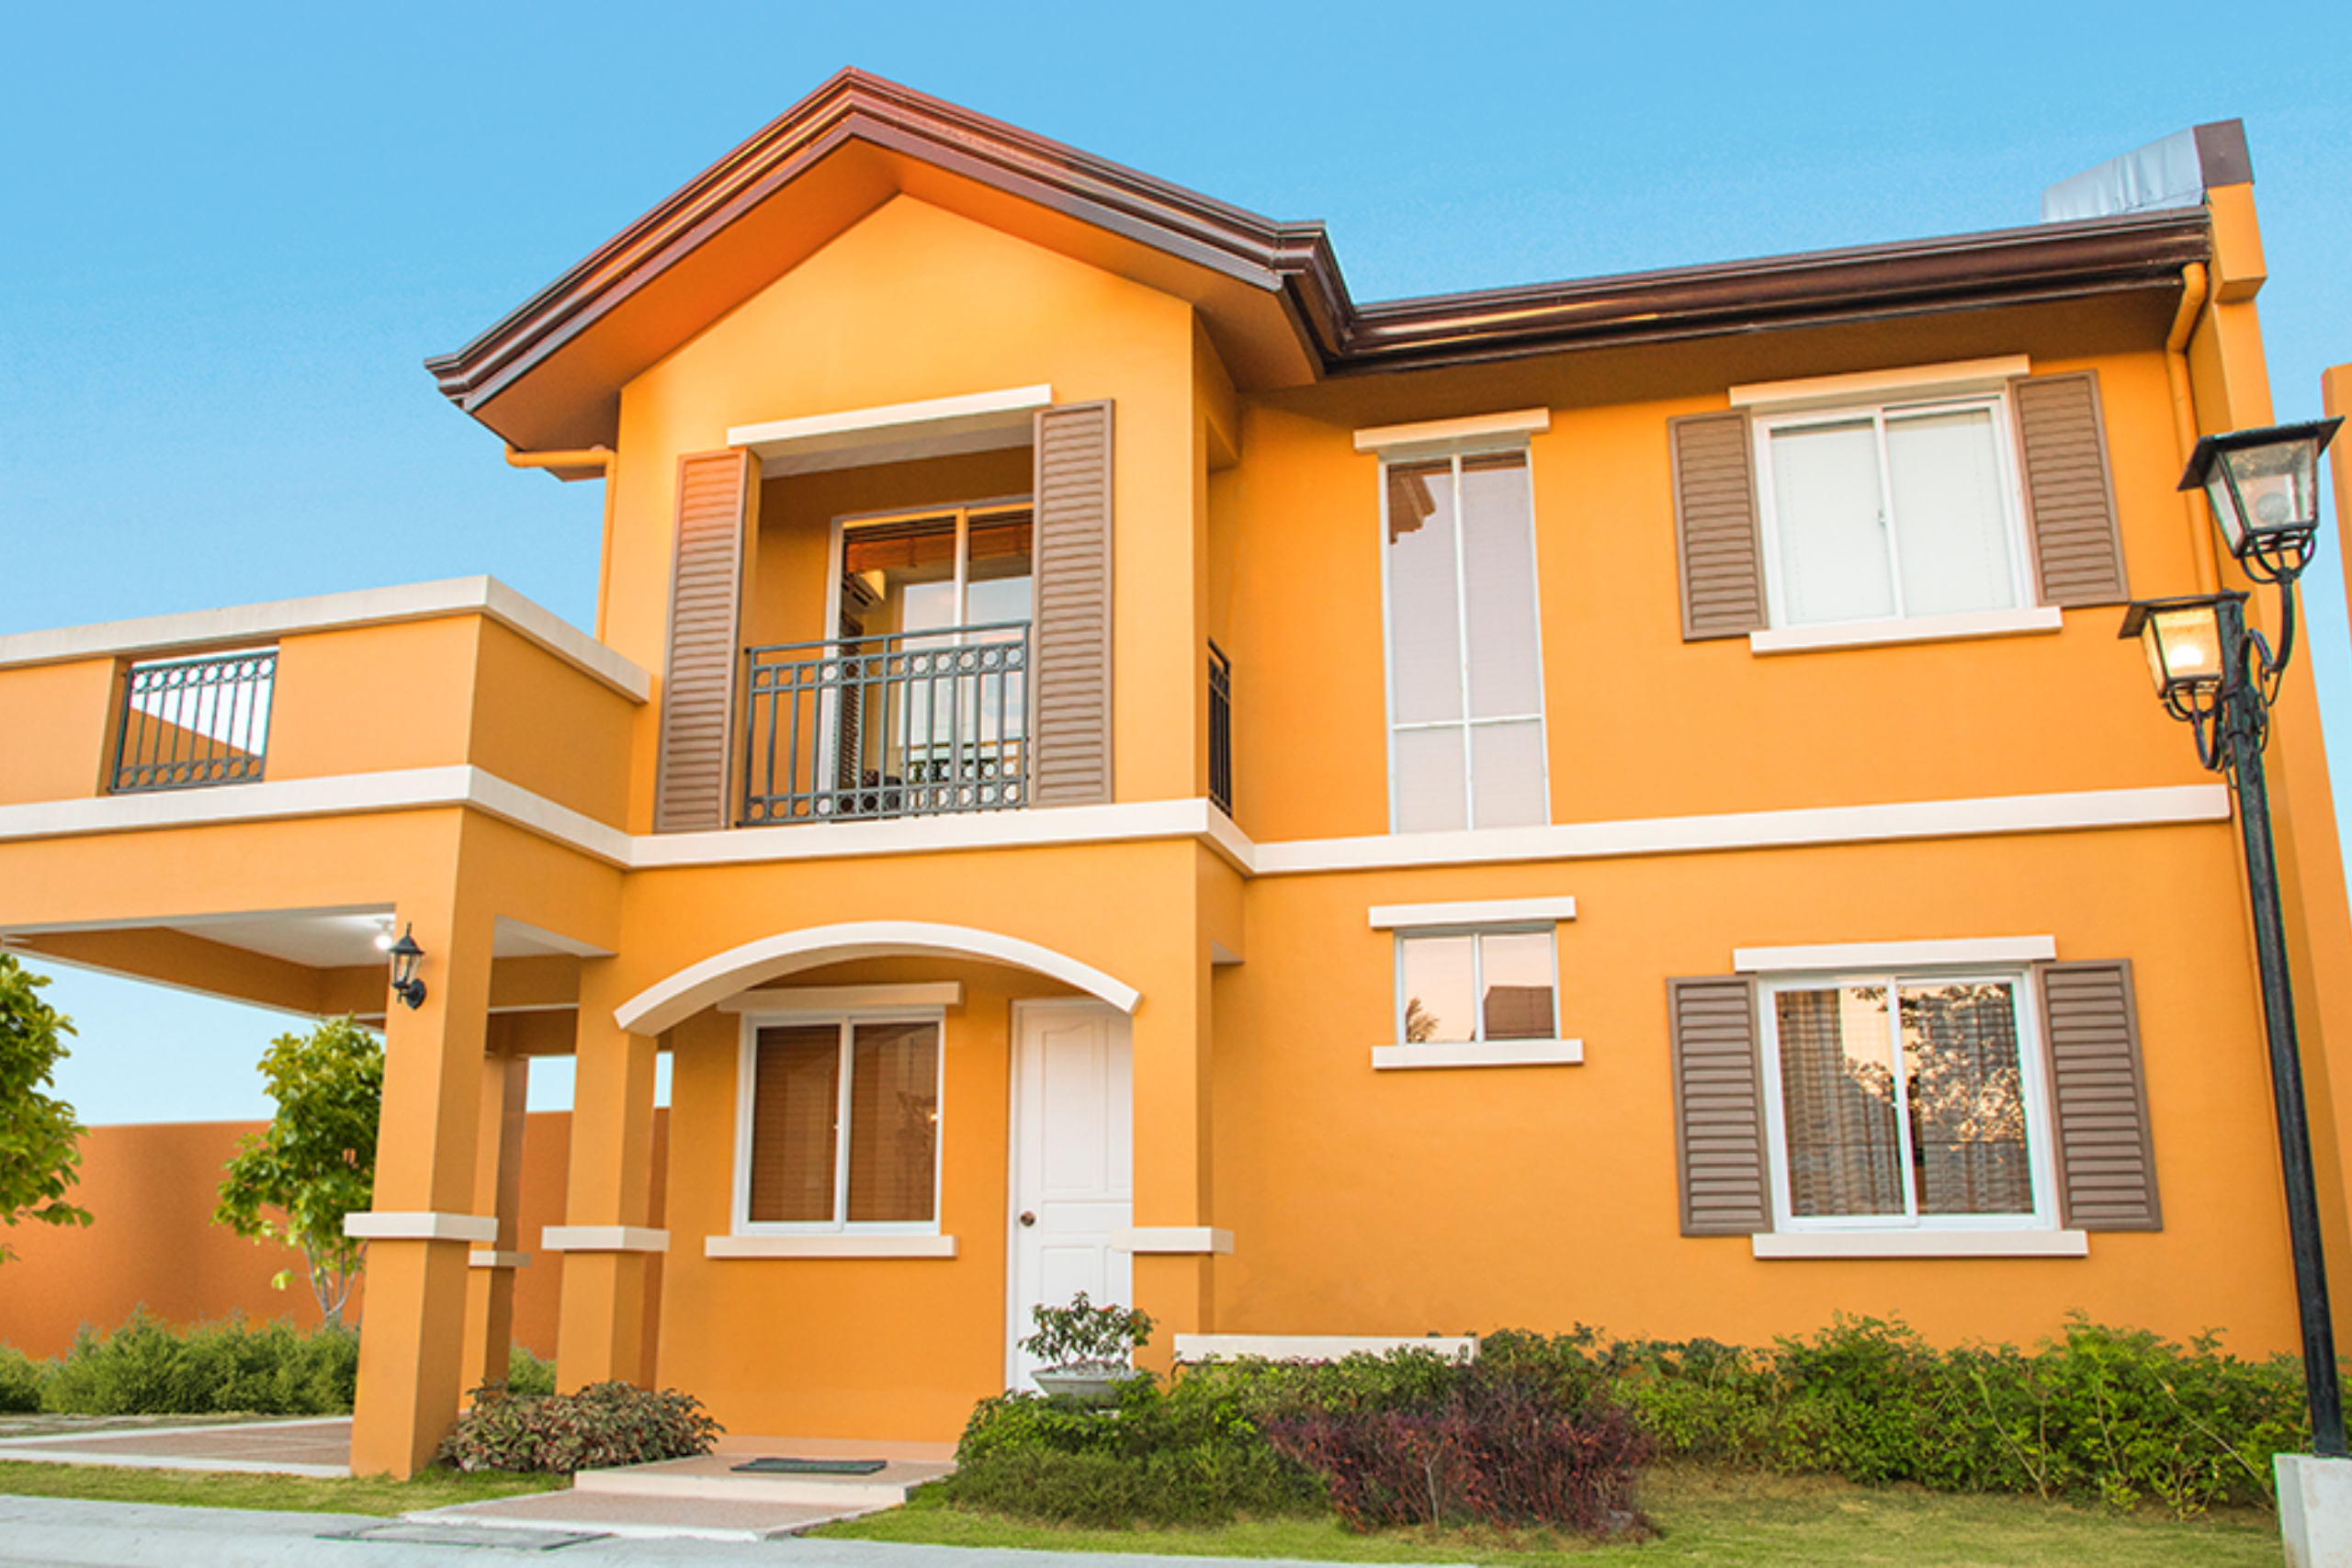 Reasons To Buy A House and Lot in the Philippines